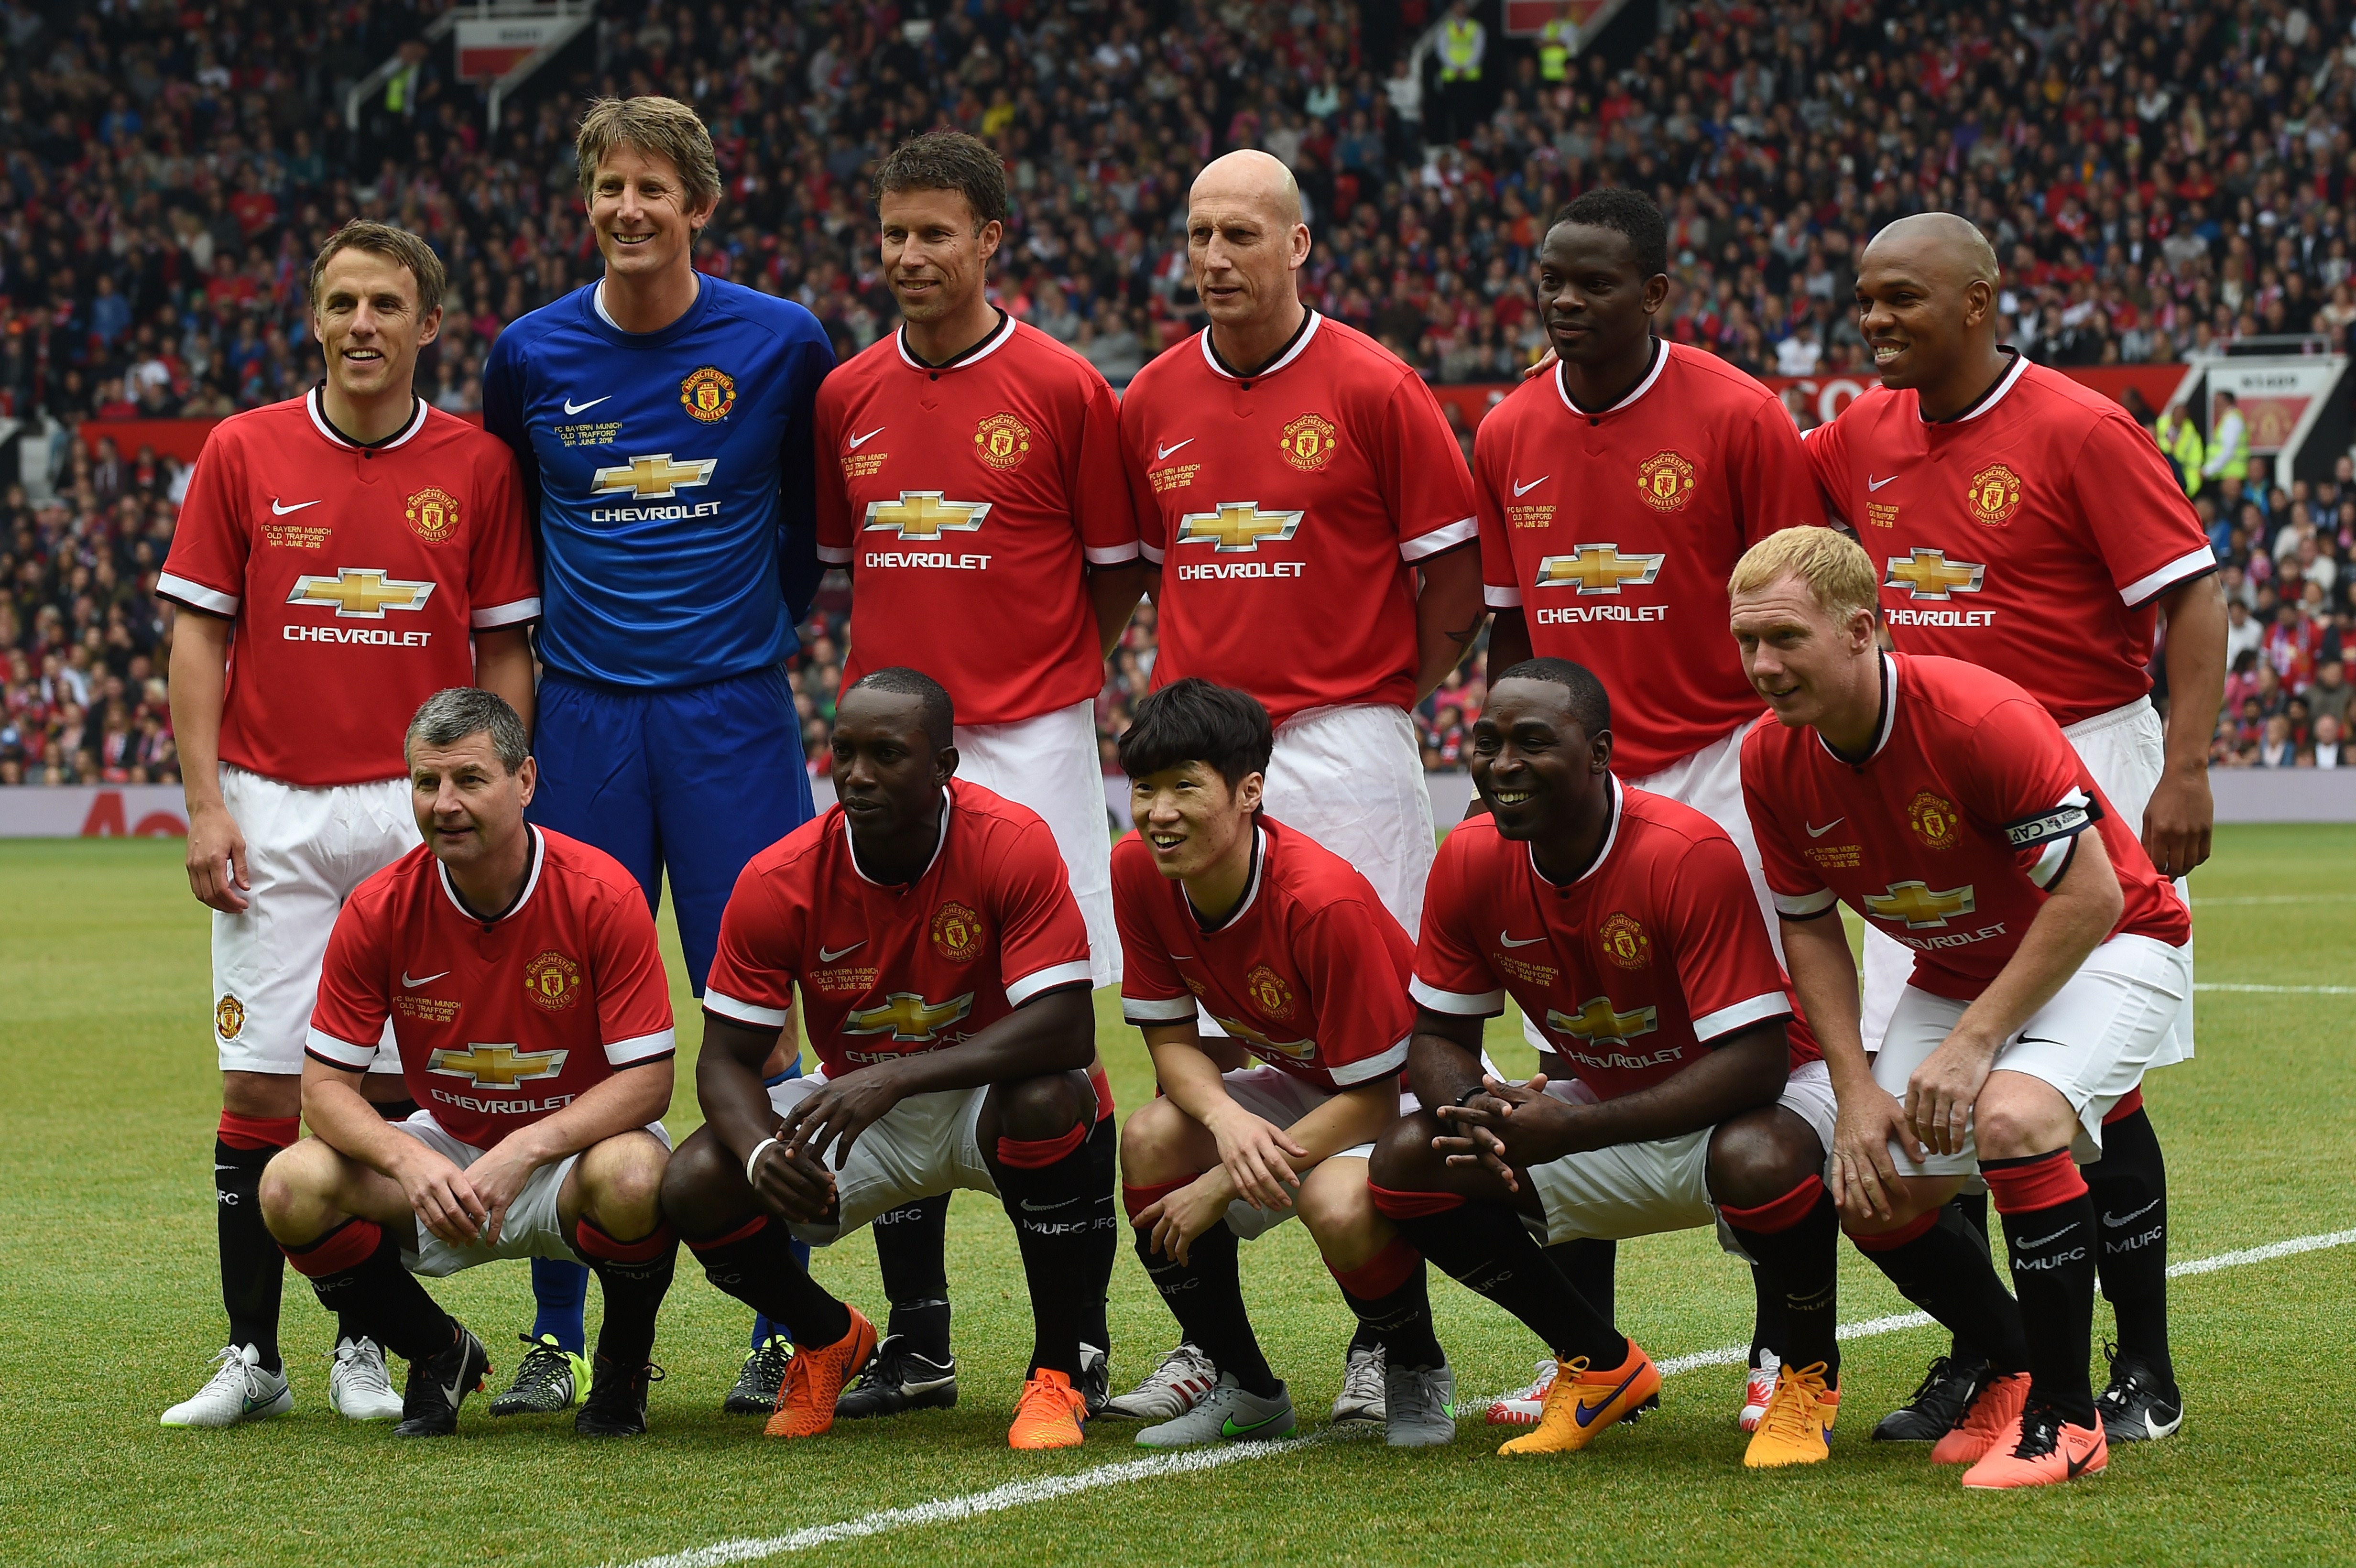 Manchester Utd legends (top L-R) Phil Neville, Edwin van der Sar, Ronny Johnsen, Jaap Stam, Louis Saha, Quinton Fortune (bottom L-R) Denis Irwin, Dwight Yorke, Park Ji-Sung, Andy Cole and Paul Scholes pose for a team photograph at the start of the friendly football match between Manchester United's Legends and Bayern Munich All Stars at Old Trafford in Manchester, northwest England, on June 14, 2015. The charity friendly football match reuniting former Manchester United stars with legends from Bayern Munich was played in aid of the Manchester United Foundation. AFP PHOTO / PAUL ELLIS        (Photo credit should read PAUL ELLIS/AFP/Getty Images)